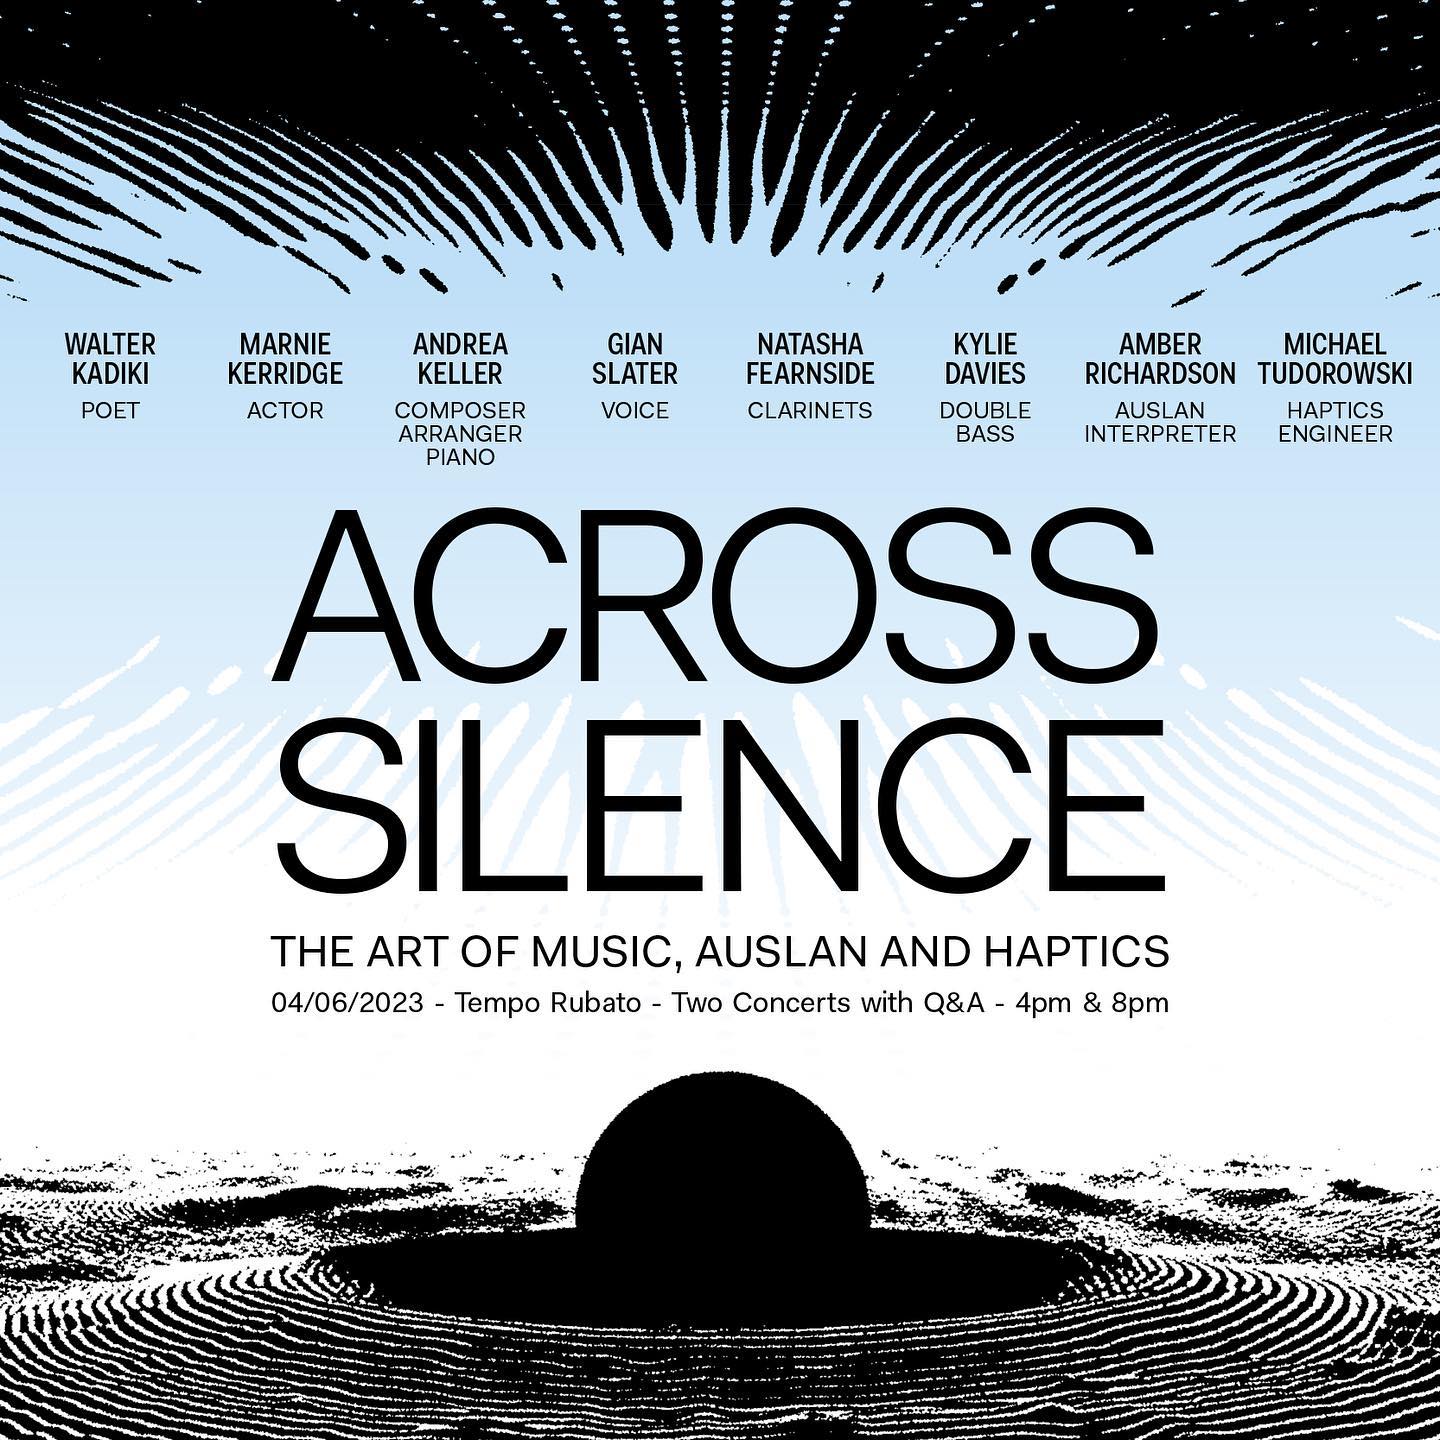 Across Silence: The Art of Music, Auslan and Haptics - 8pm (The Newmarket Collective) [Melbourne]